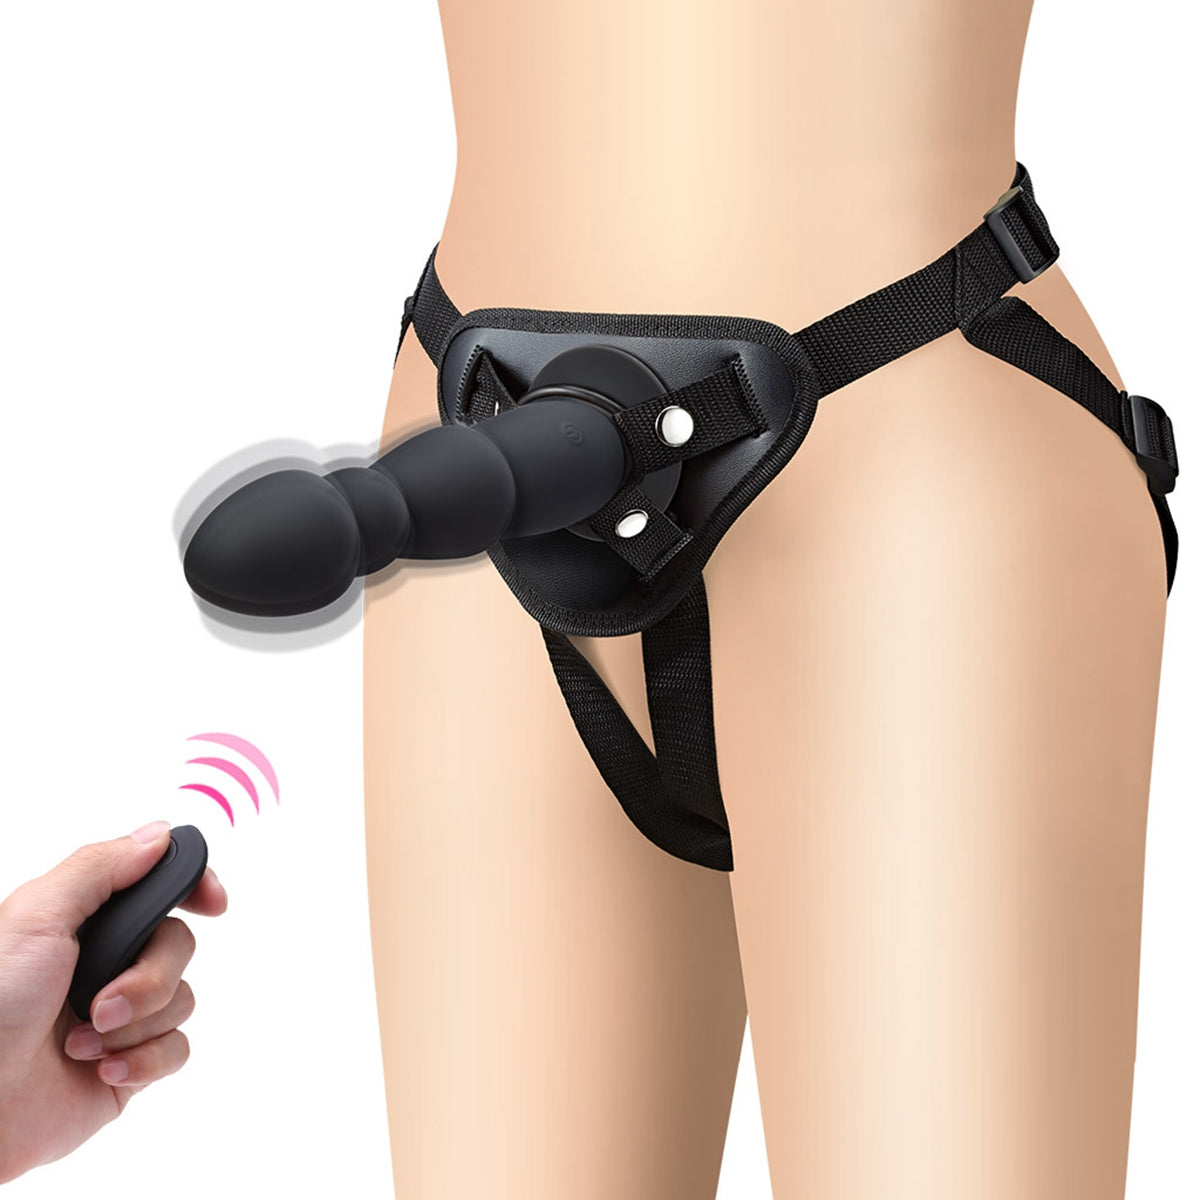 Strap on Harness Adjustable Universal Adult Sex Toy for Couple Lesbian